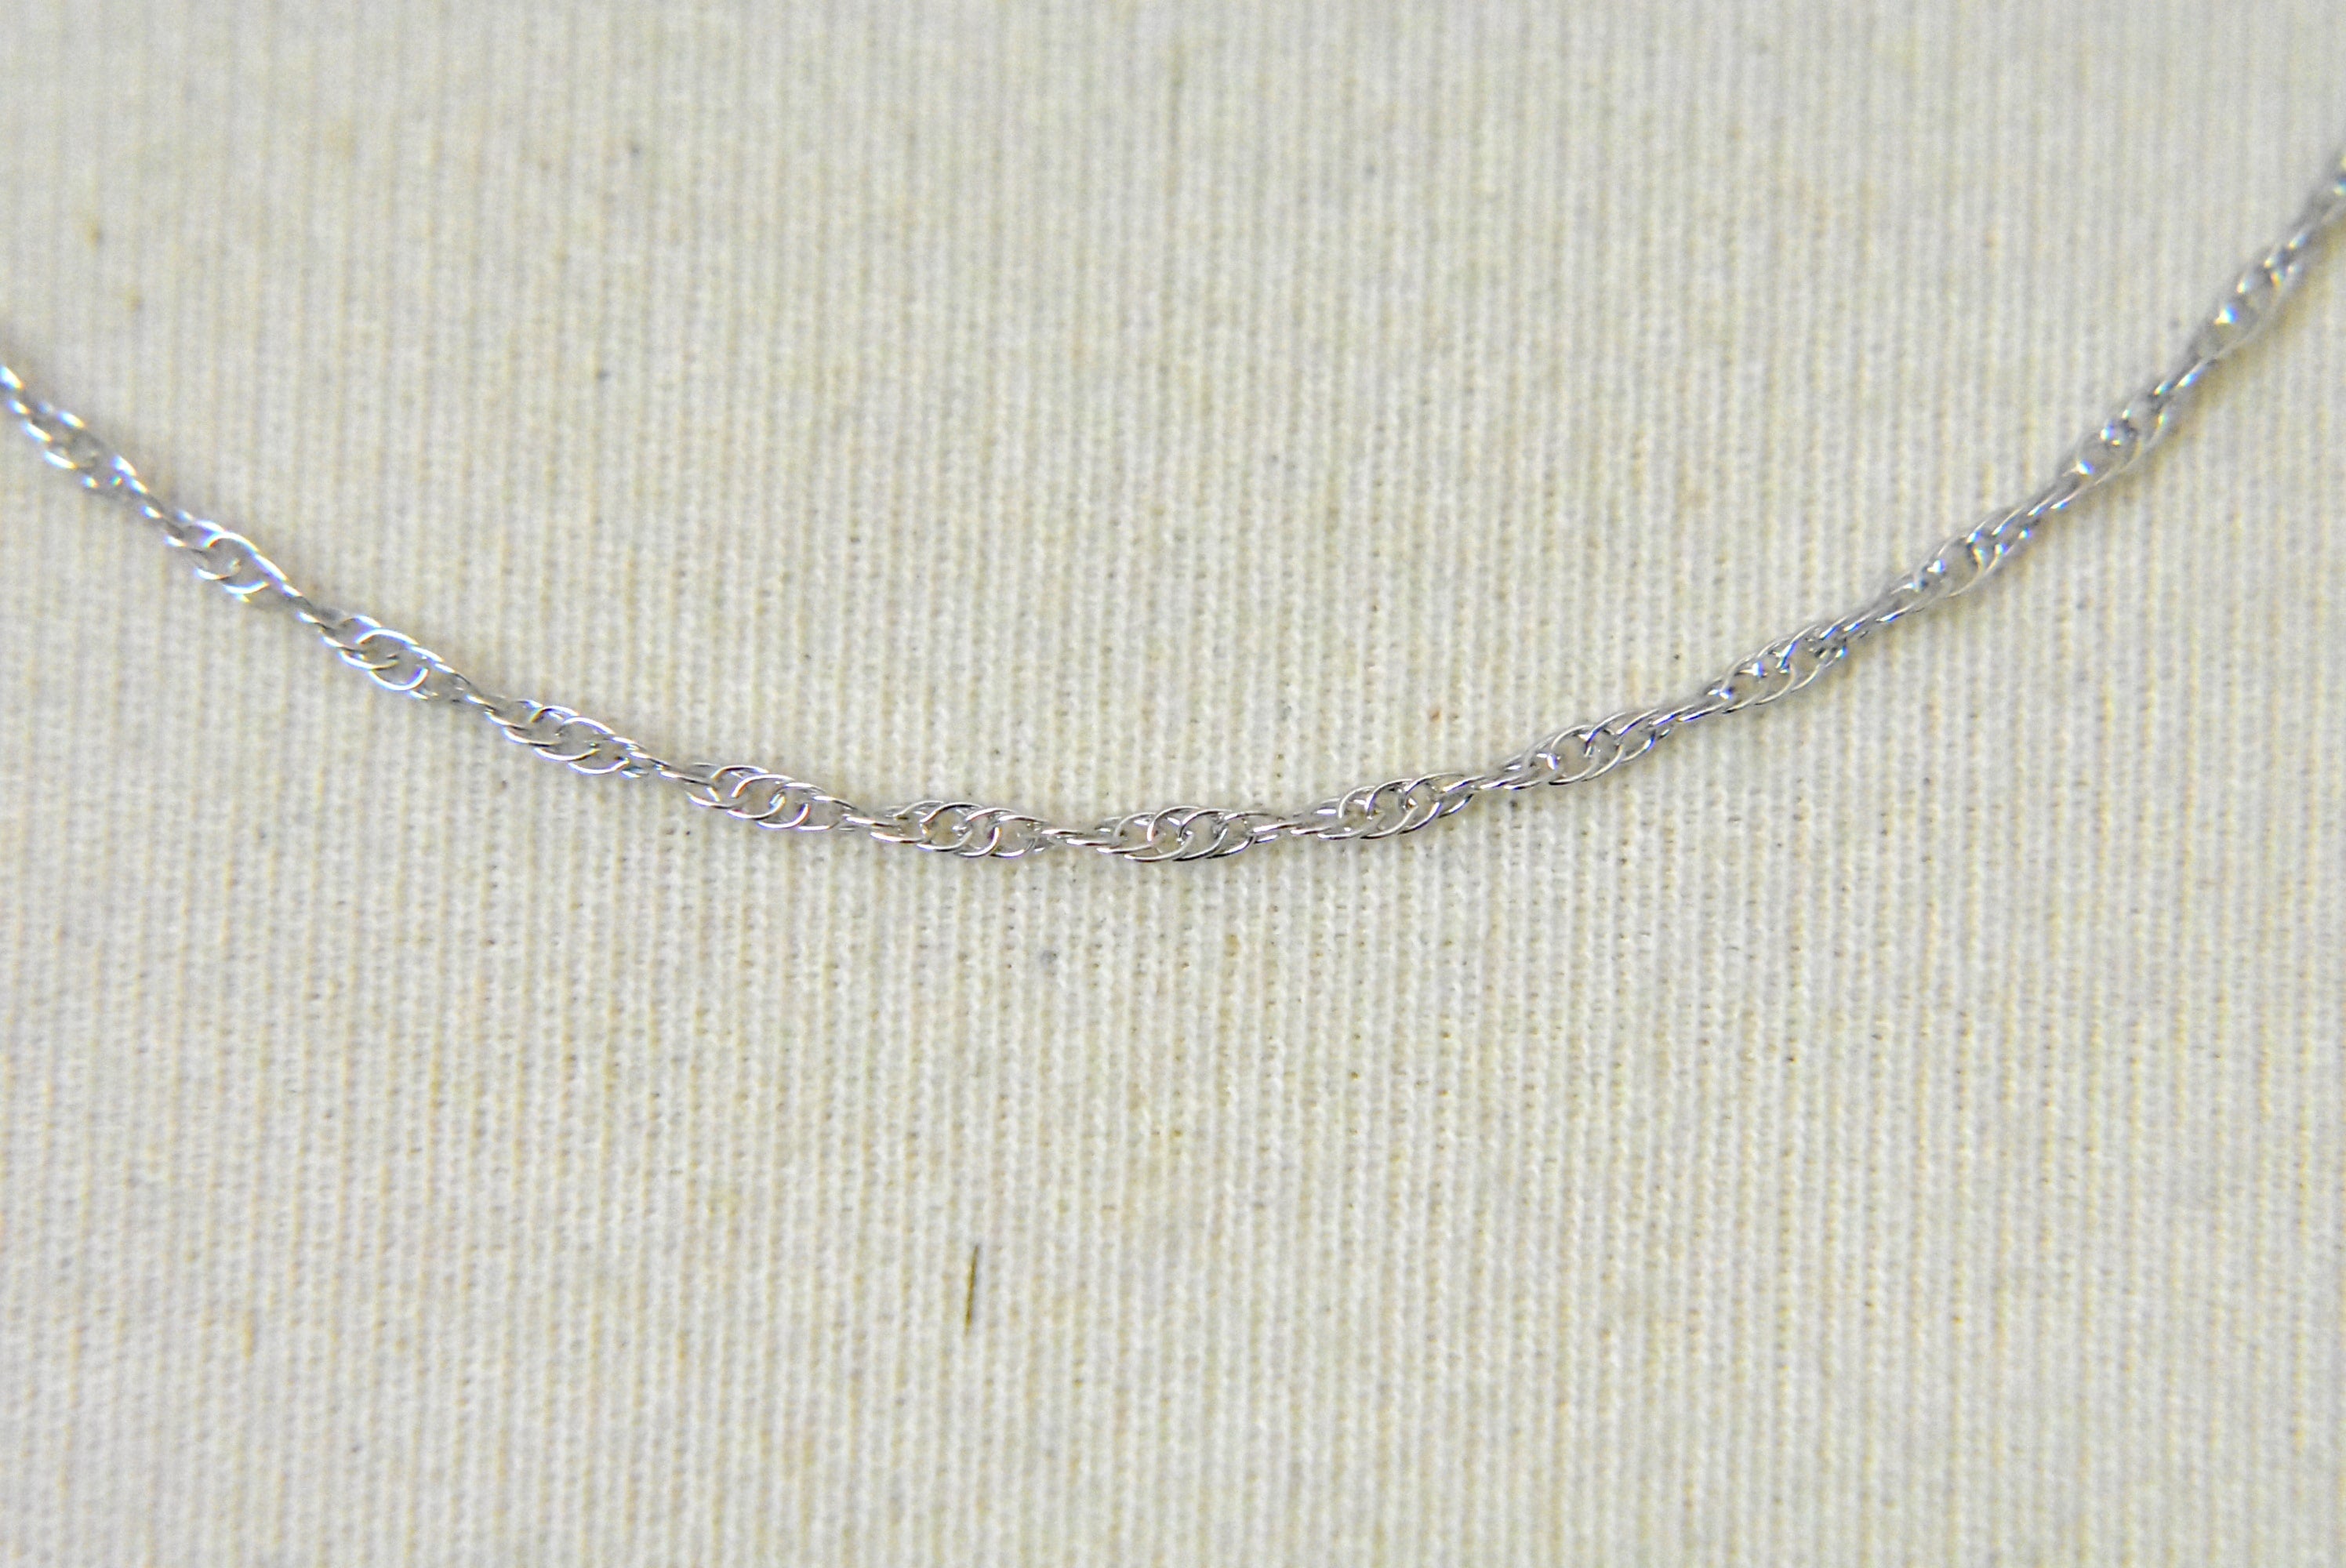 14k White Gold 1.15mm Cable Rope Necklace Choker Pendant Chain